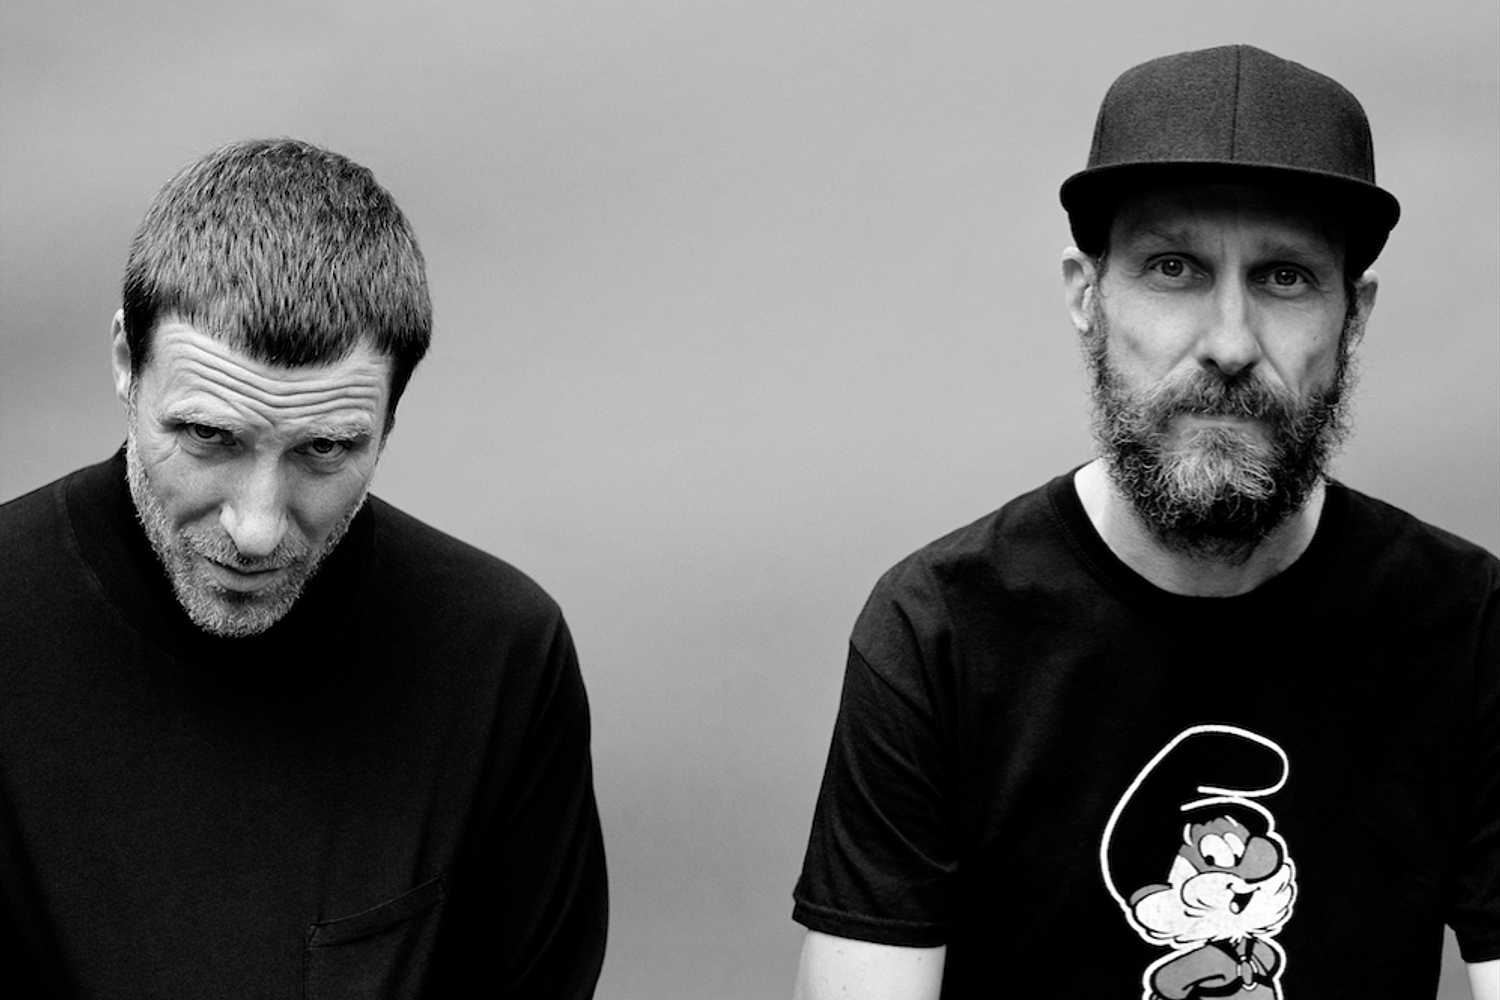 Sleaford Mods link up with Amyl & The Sniffers' Amy Taylor for new single 'Nudge It'